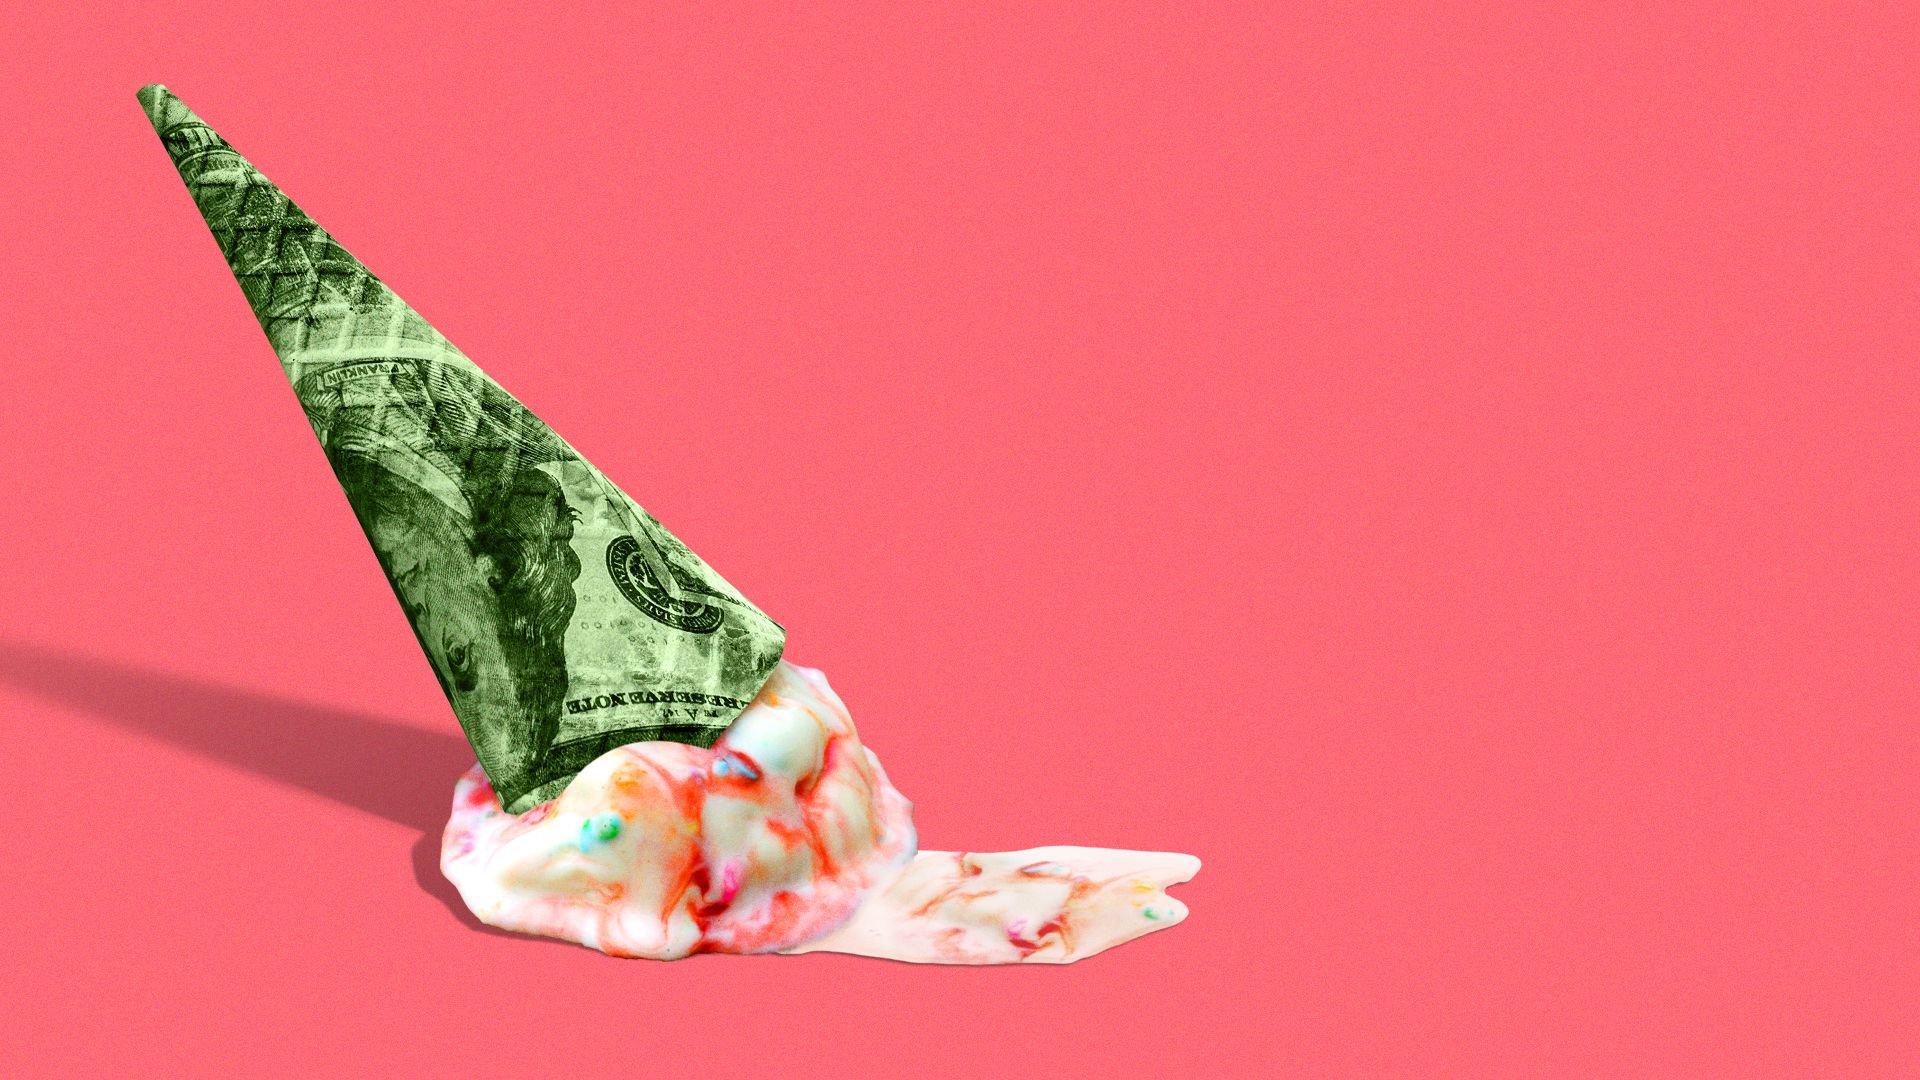 Illustration of a melting ice cream cone, but the cone is a dollar bill.